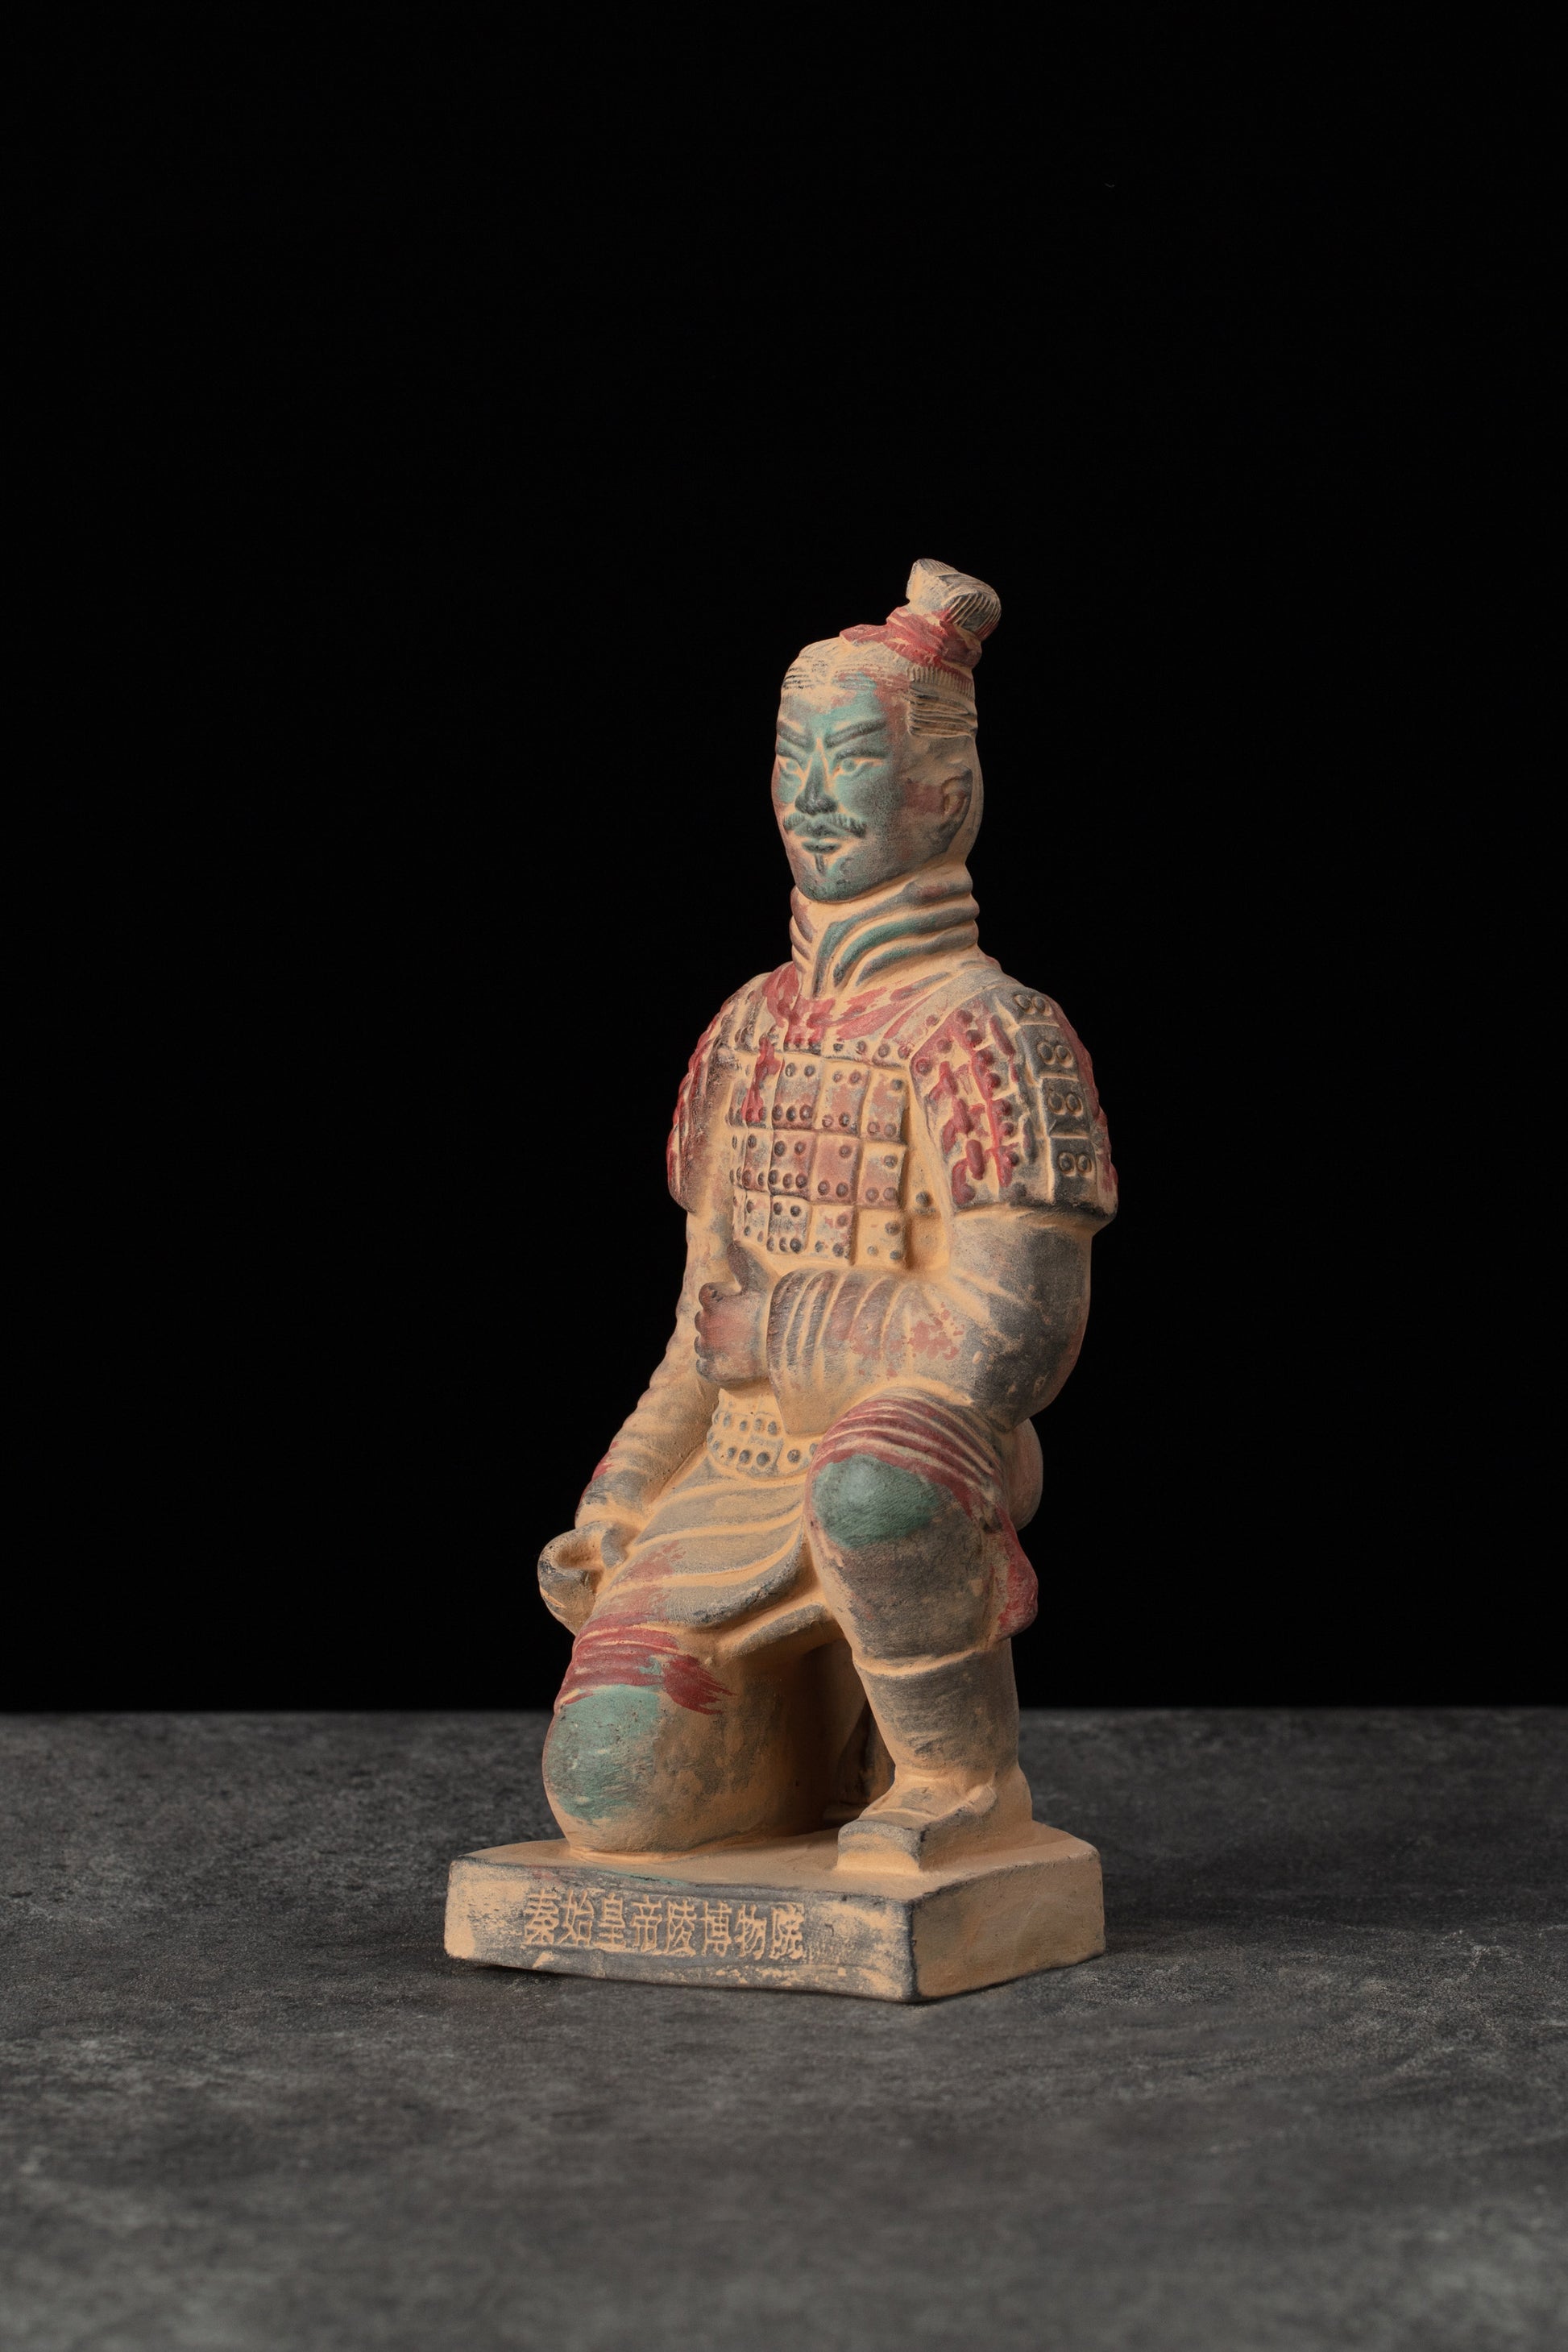 20CM Painted Kneeling Archer - CLAYARMY-Side perspective showcasing the craftsmanship and vibrant colors of the 20CM Painted Soldier's accessories.